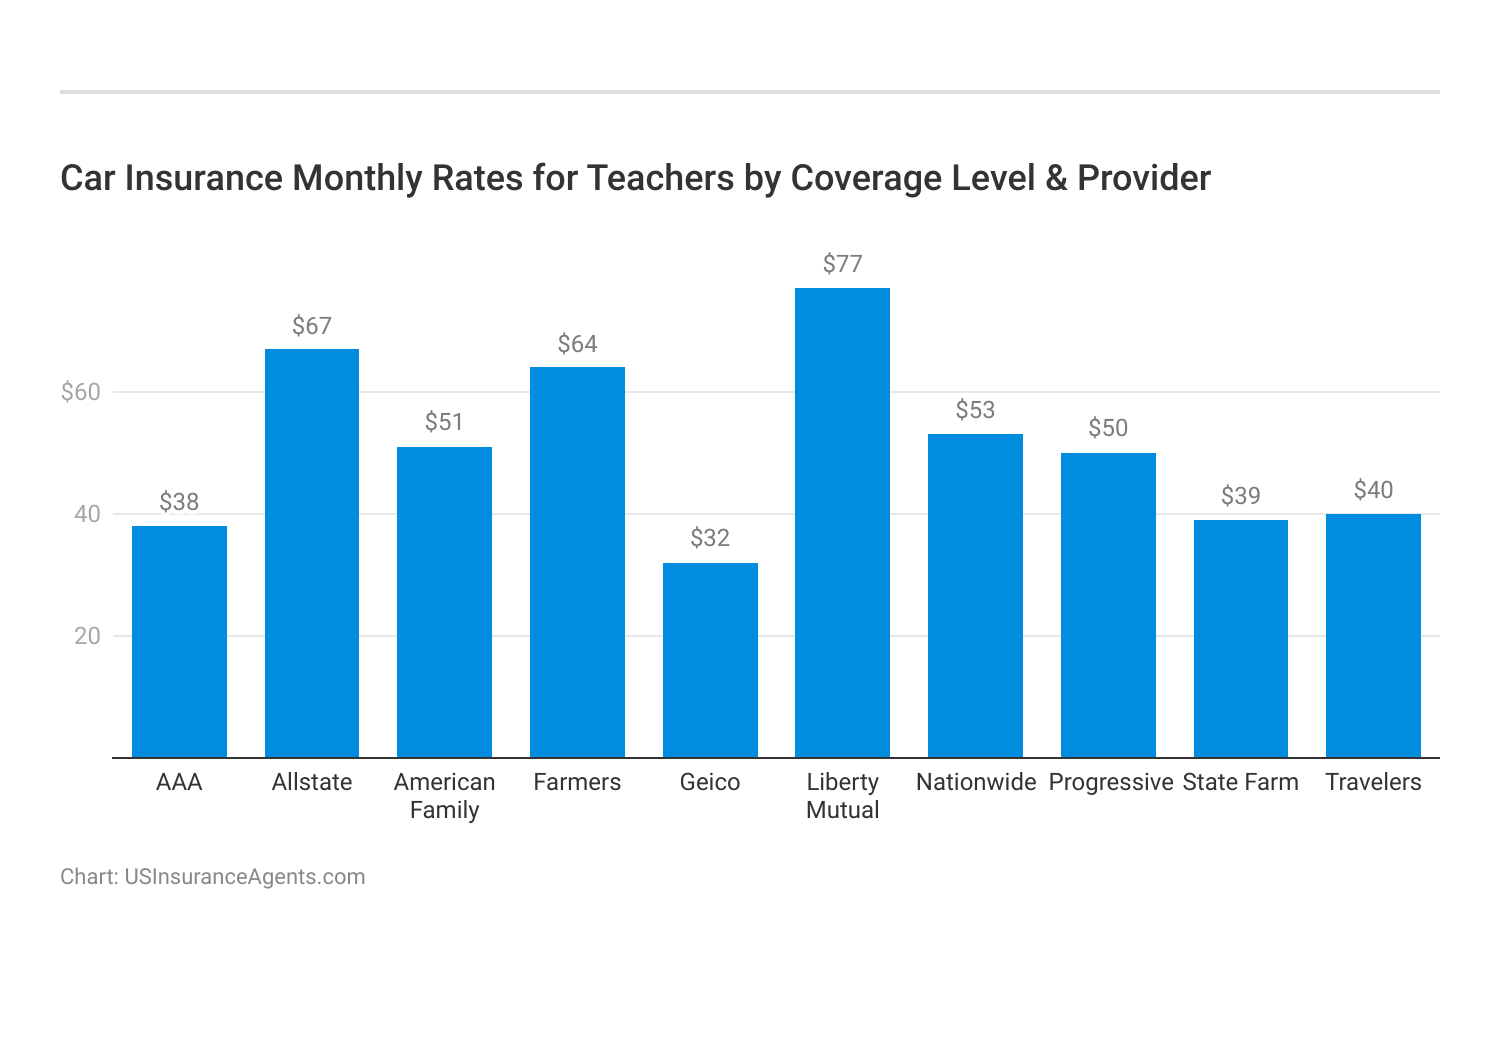 <h3>Car Insurance Monthly Rates for Teachers by Coverage Level & Provider</h3>